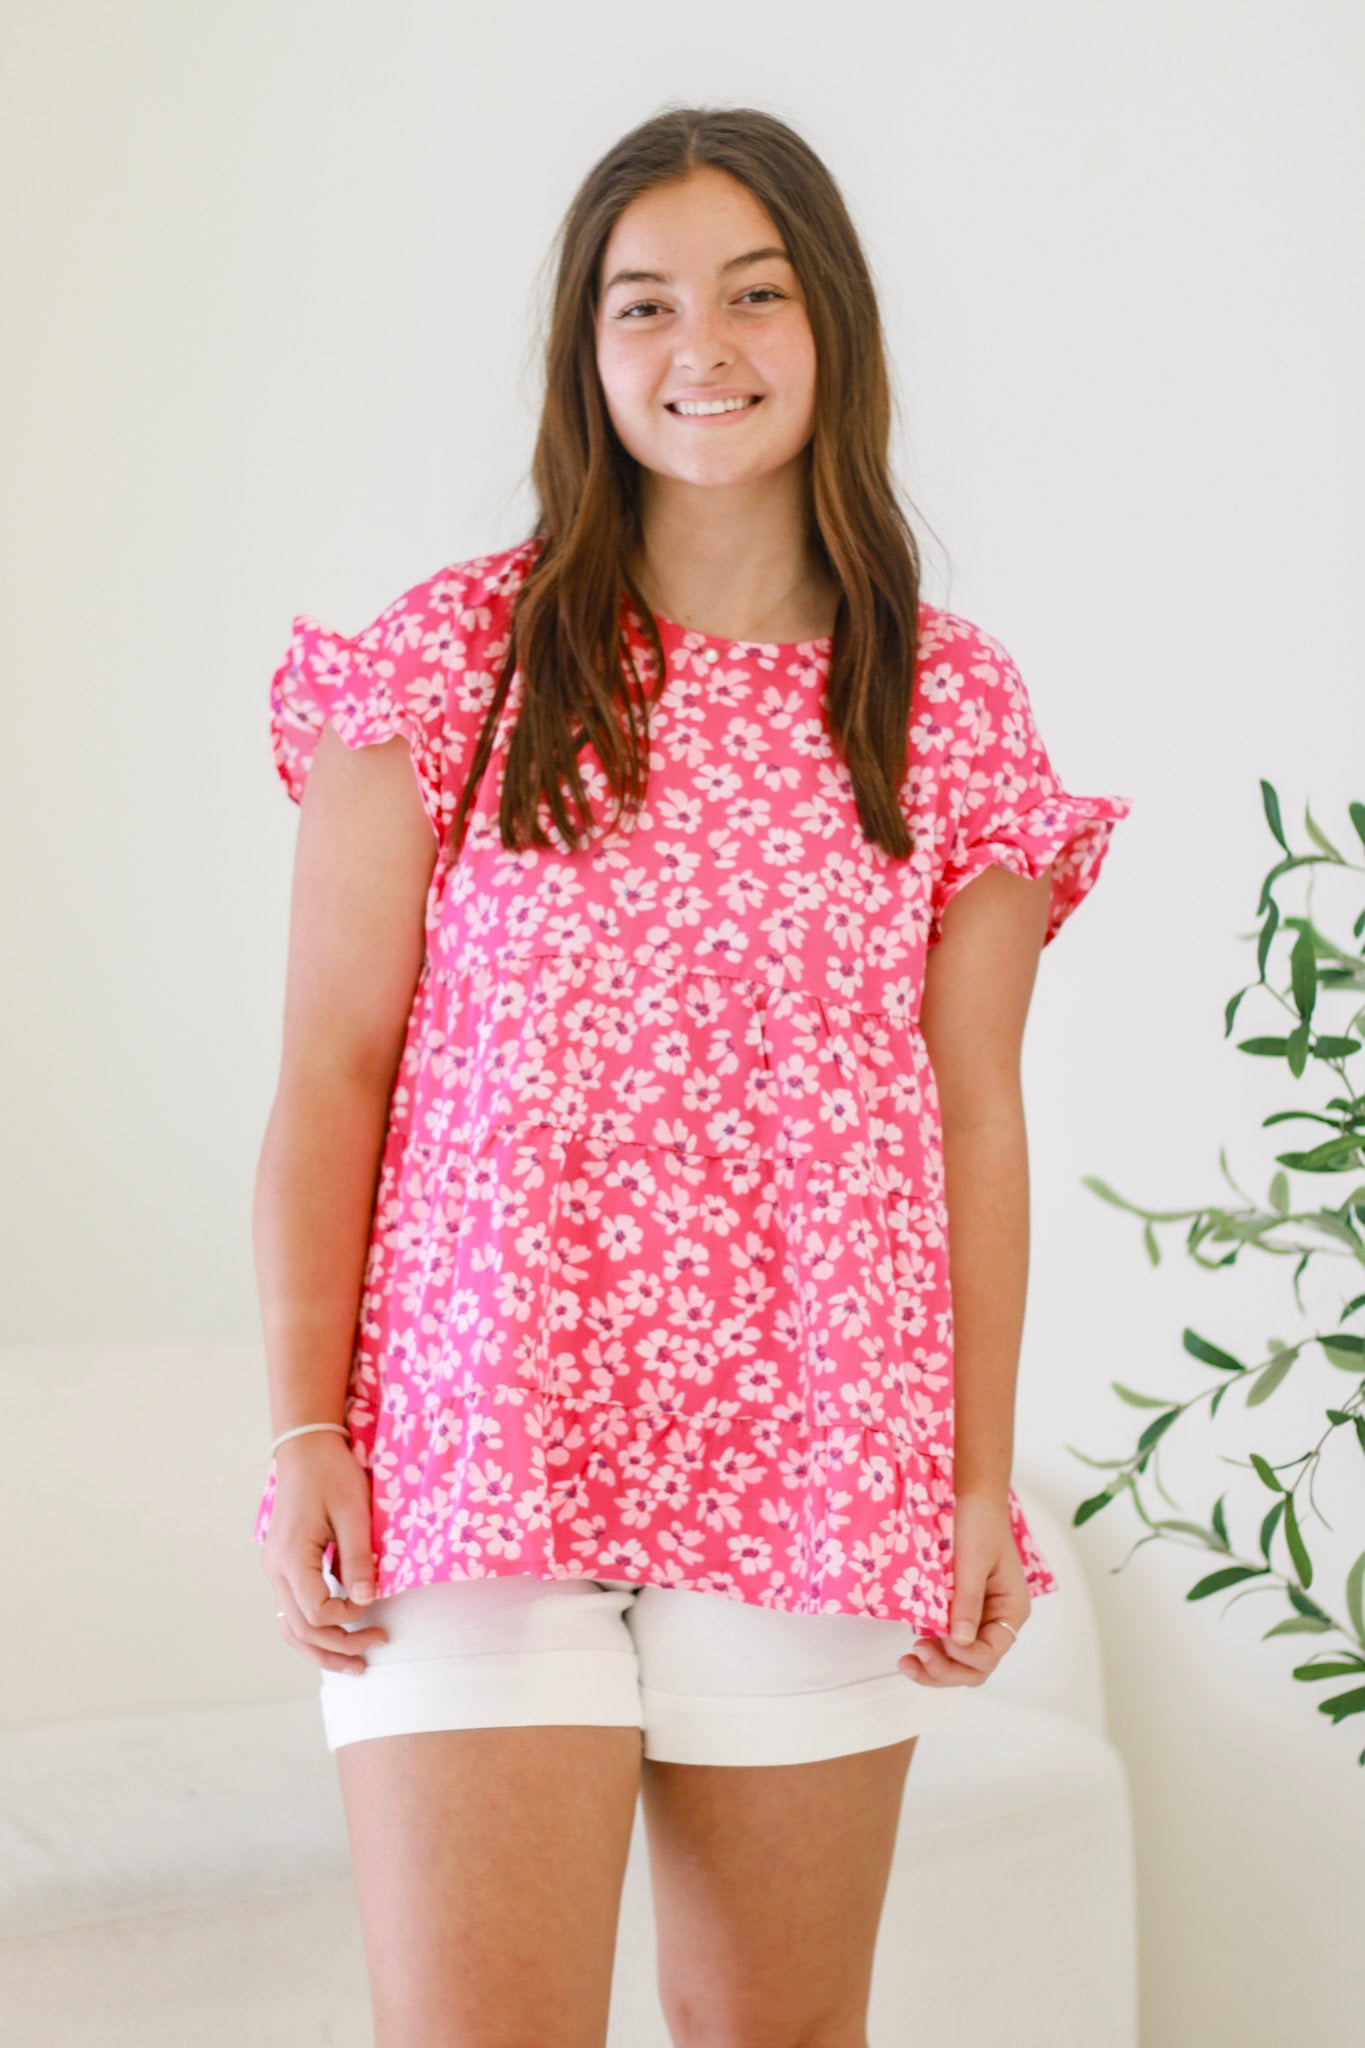 Southern Sass Floral Top in Pink